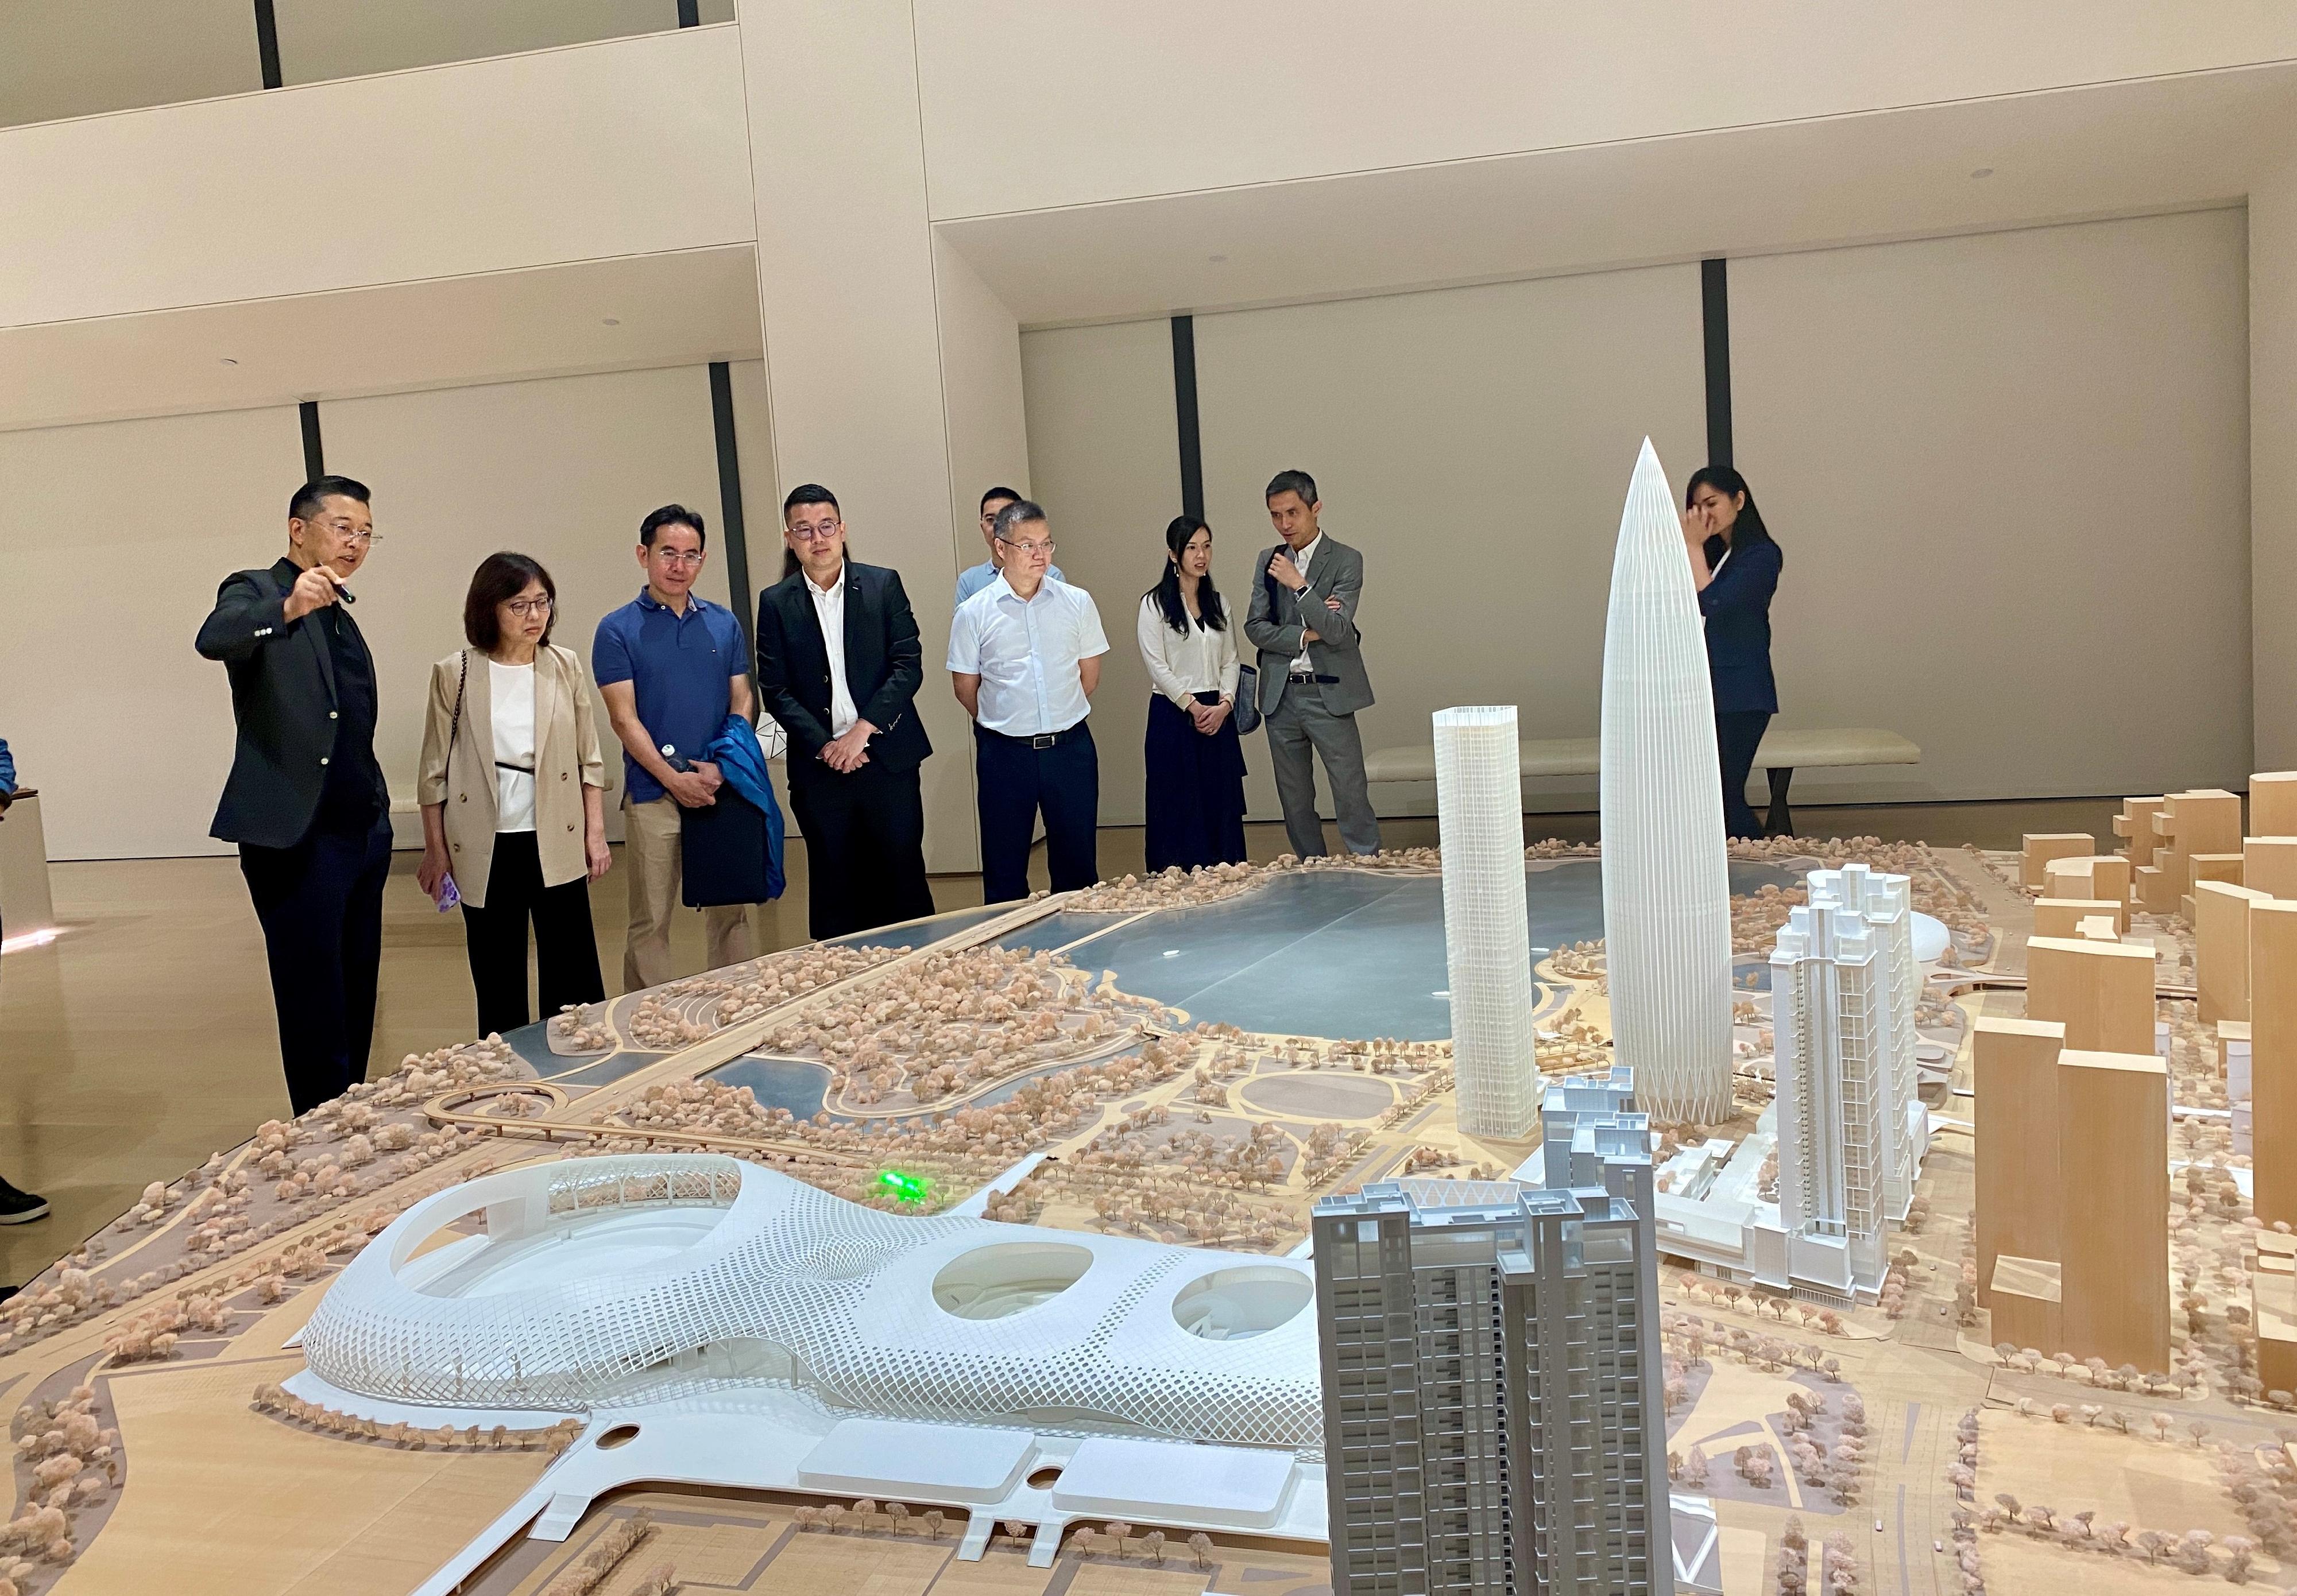 The Secretary for Development, Ms Bernadette Linn, today (June 1) visited Nanshan District in Shenzhen to inspect the development and implementation of local districts in the area. Photo shows Ms Linn (second left); the Under Secretary for Development, Mr David Lam (third left); and the Director of the Preparatory Office for Northern Metropolis, Mr Vic Yau (second right), being briefed by a representative of the developer while looking at a model showing the local district’s development.